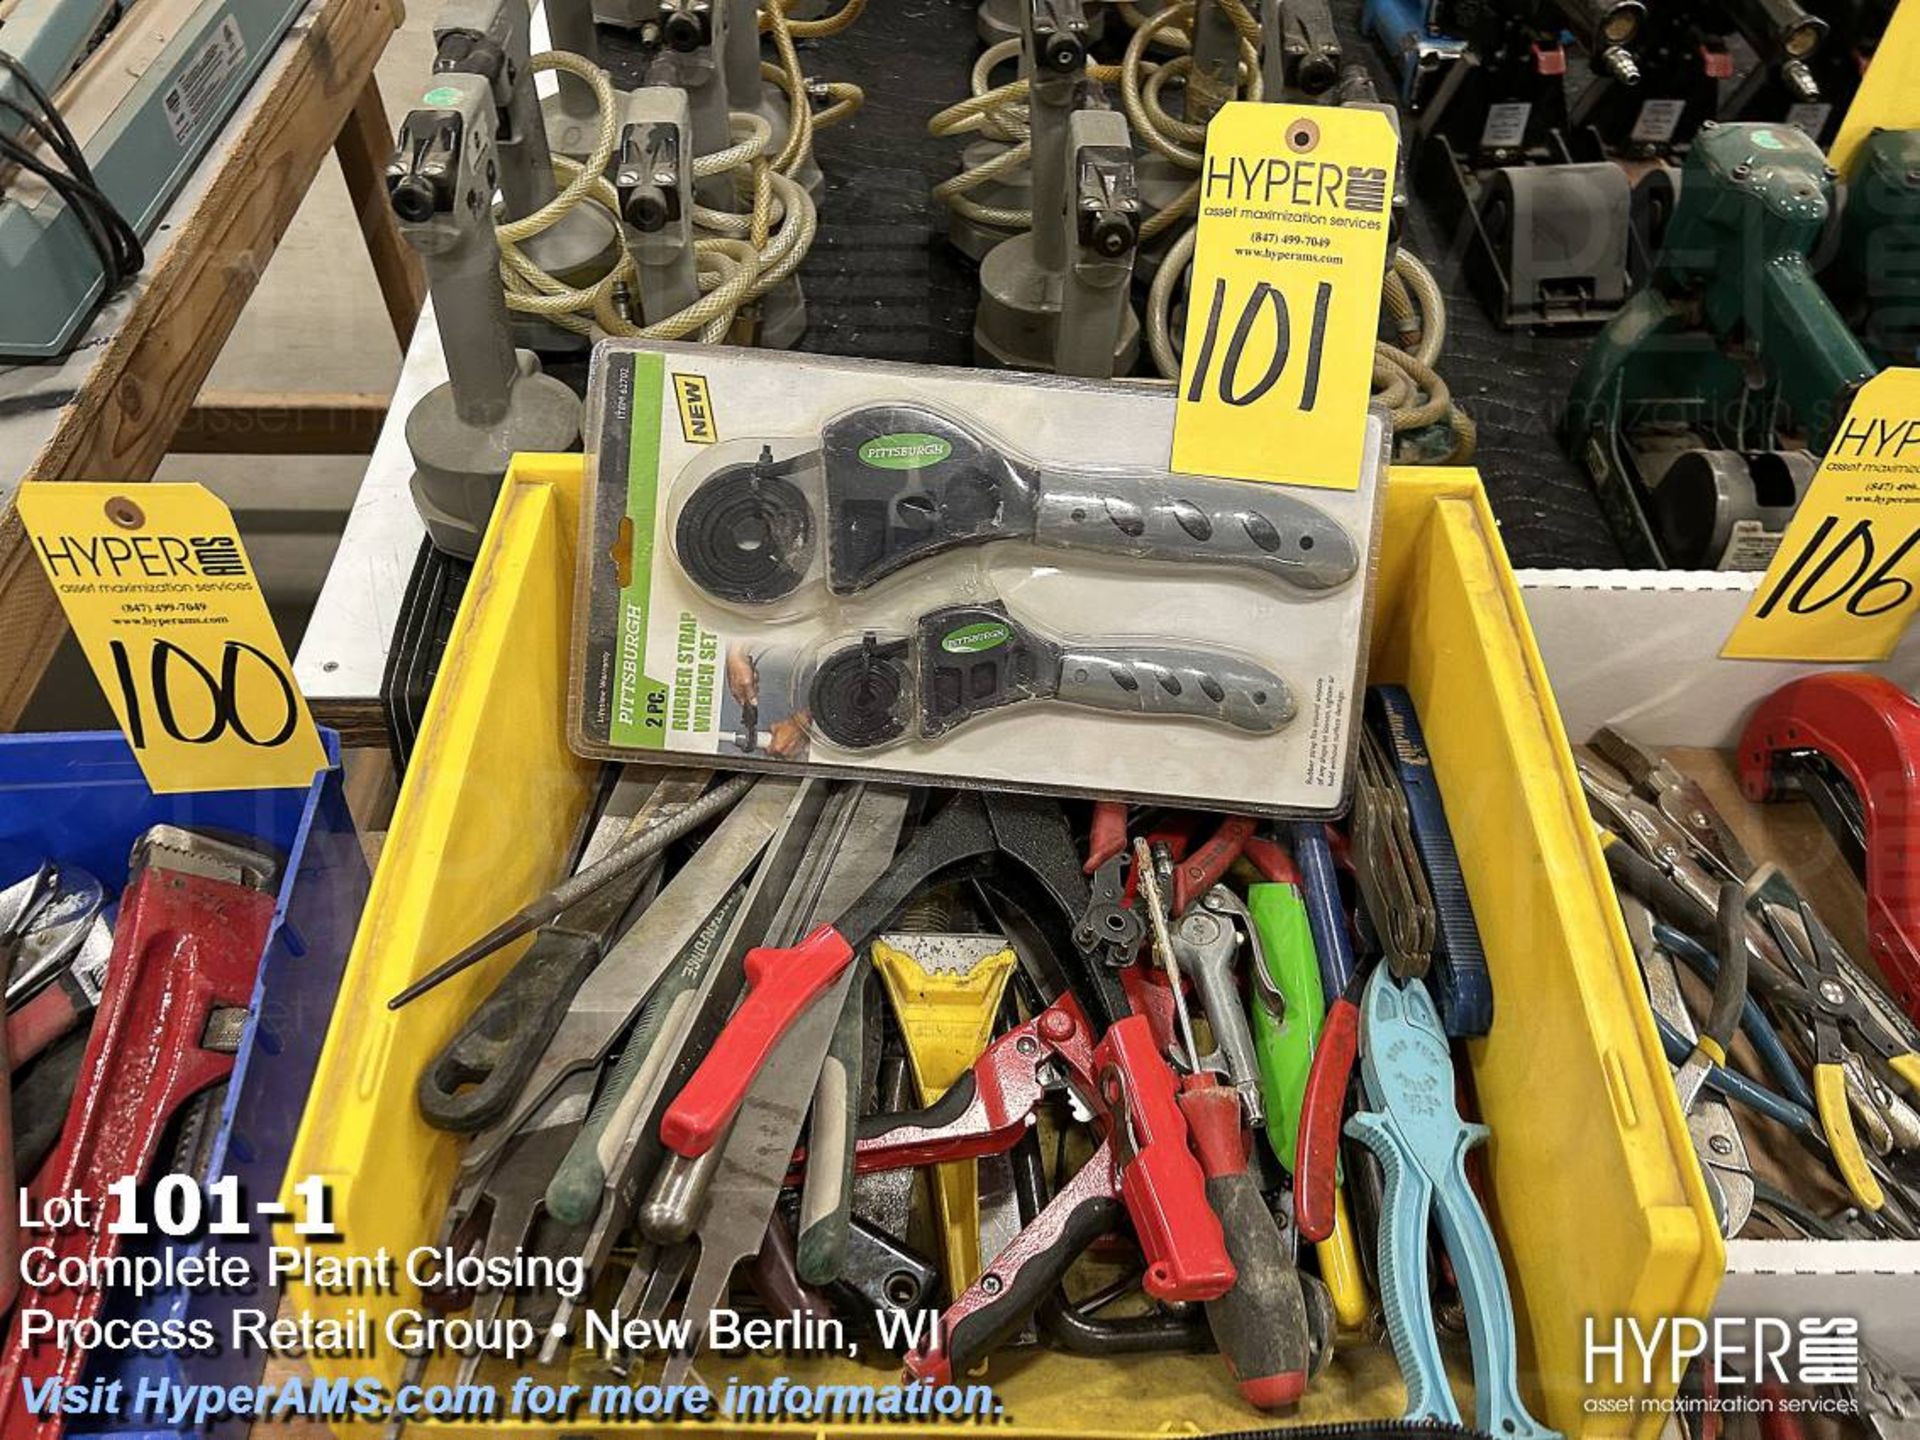 Files, ring pullers, fuse pullers, and tools